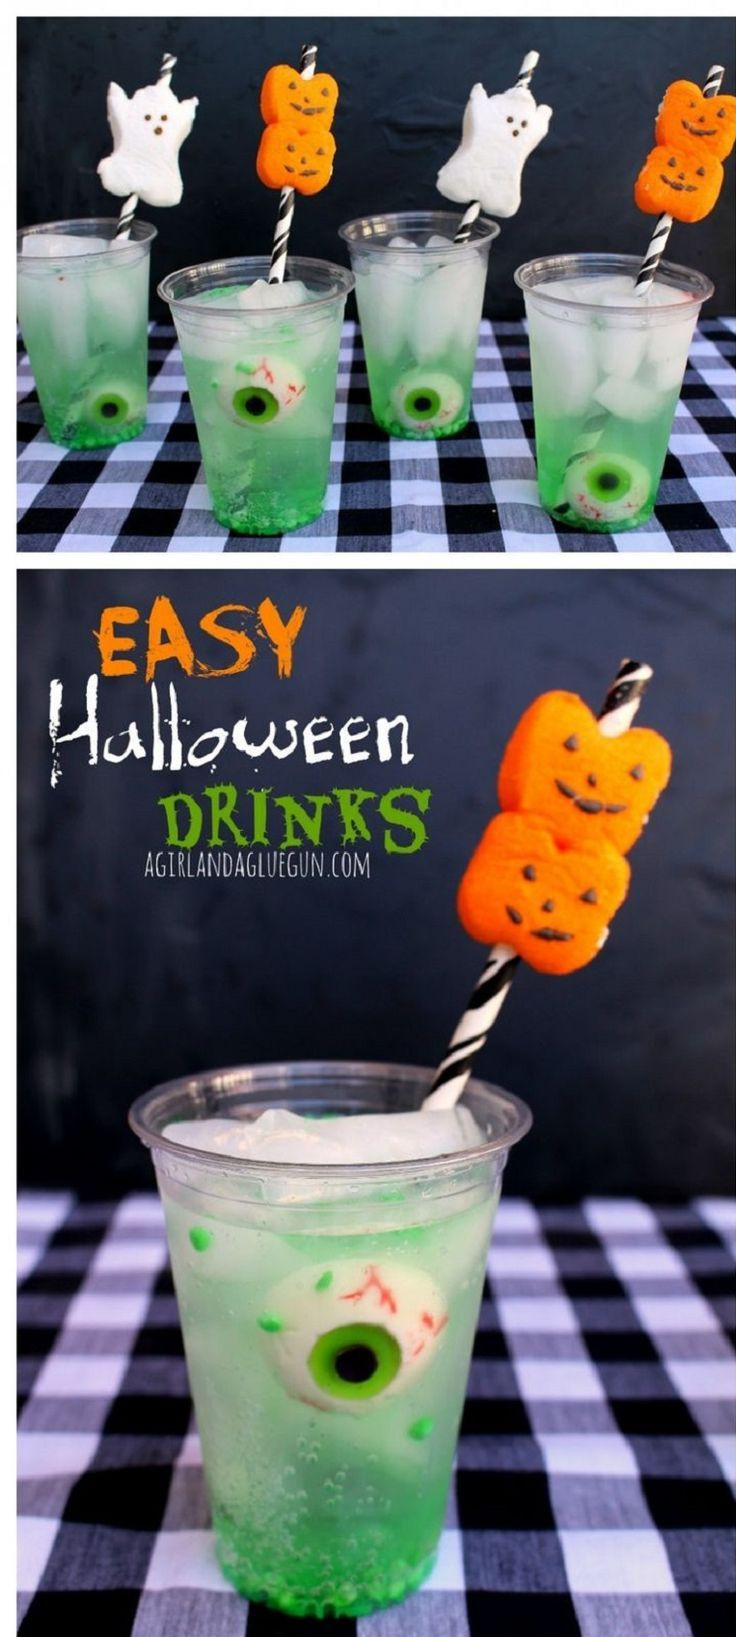 Easy Halloween Drinks Alcohol
 1000 images about Halloween crafts and activitites on